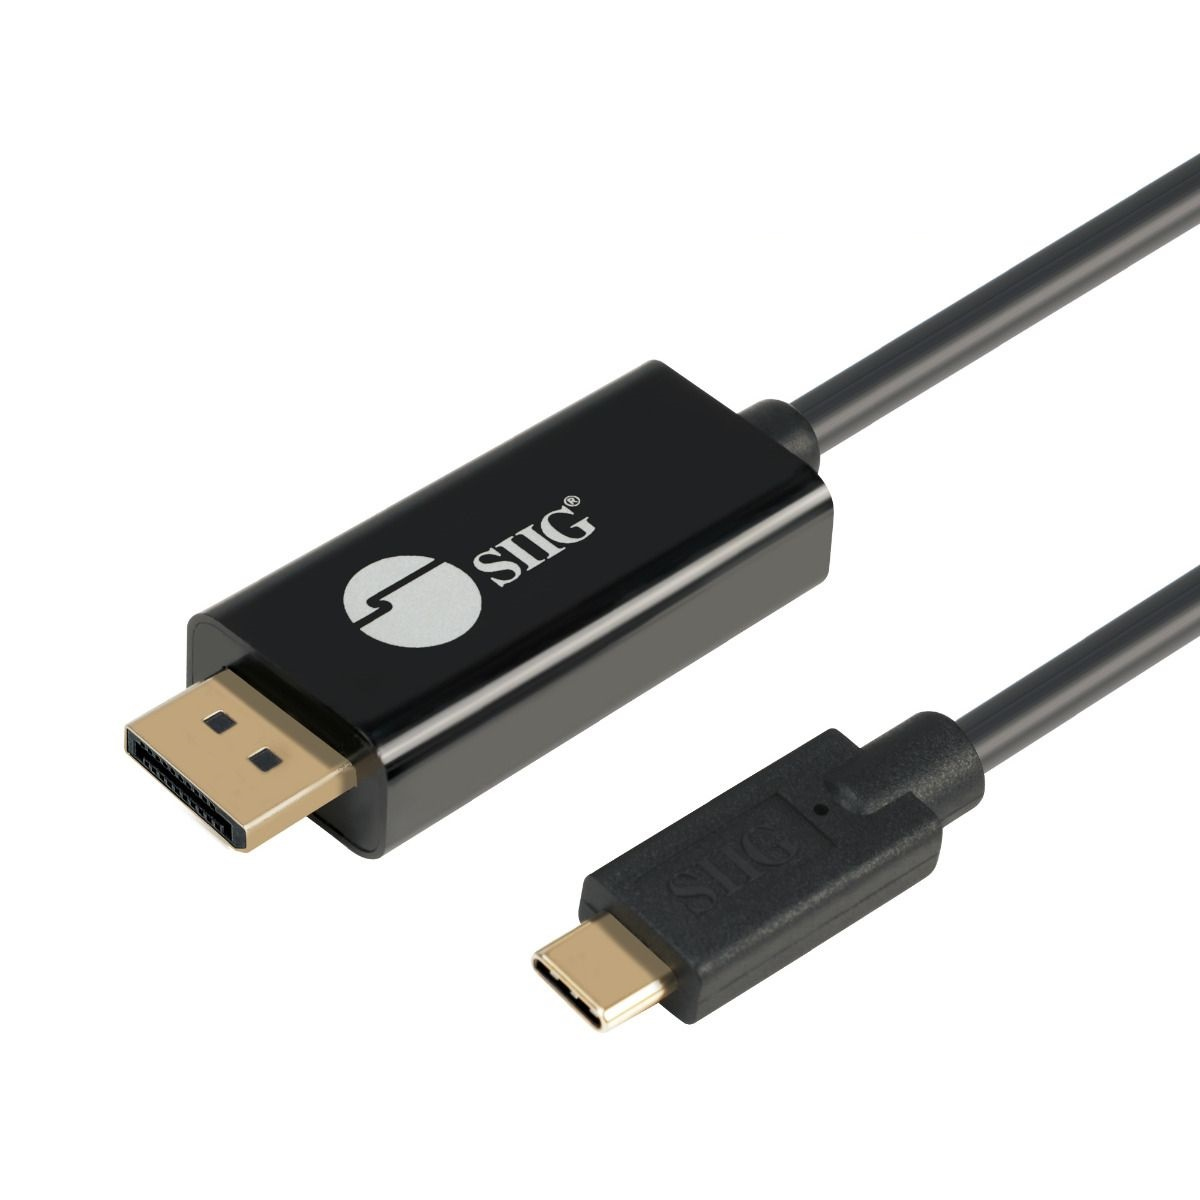 CB-TC0K11-S1 SIIG Cable CB-TC0K11-S1 USB-C to DisplayPort Cable 2M OPP Bag